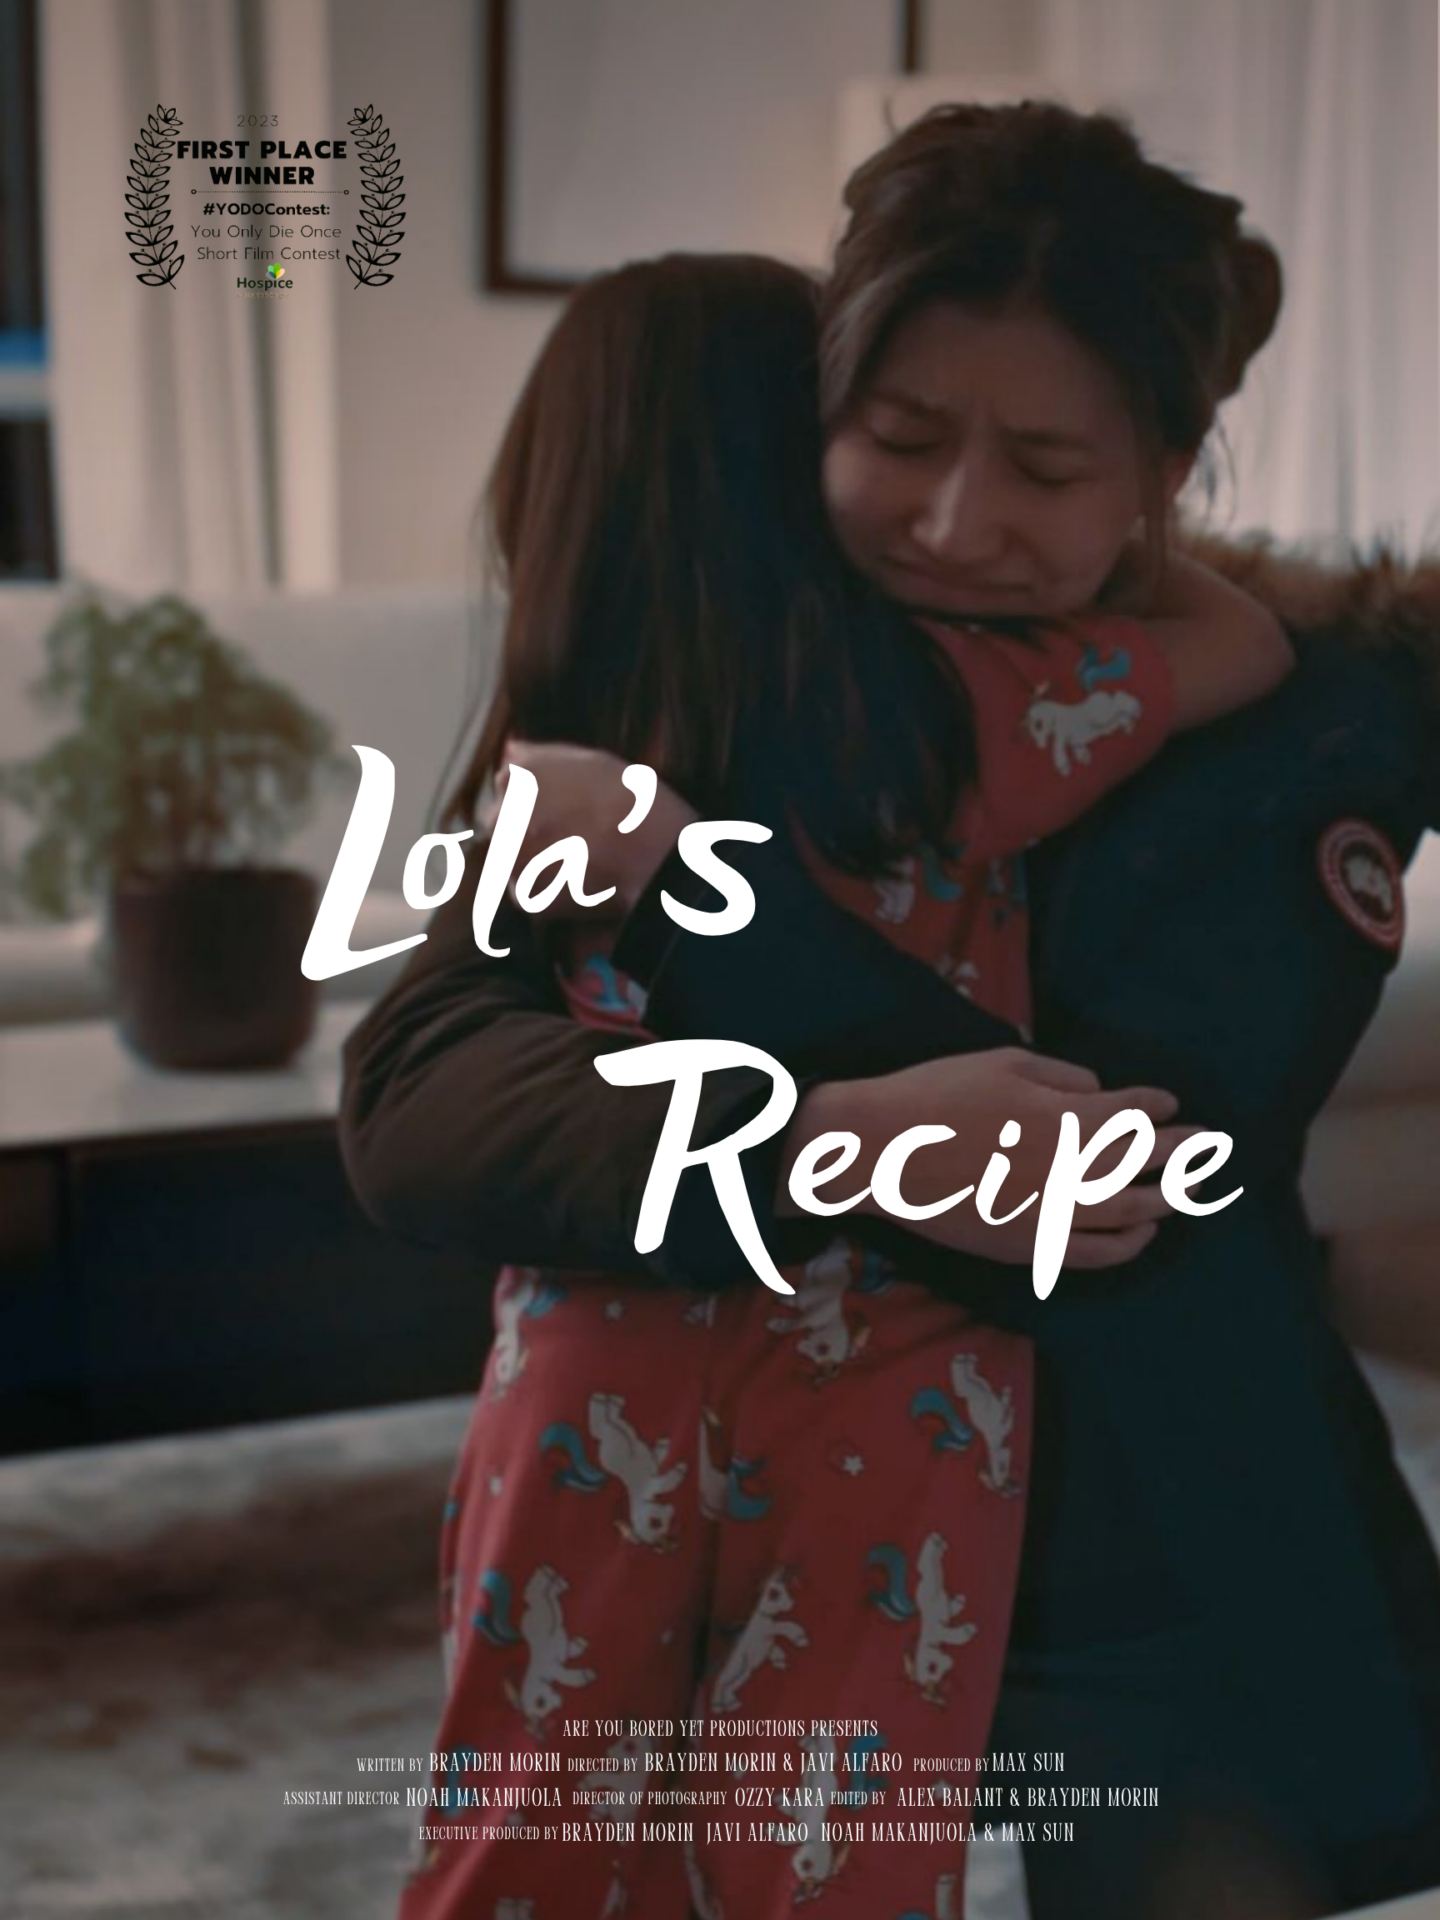 Official movie poster for Lola's Recipe